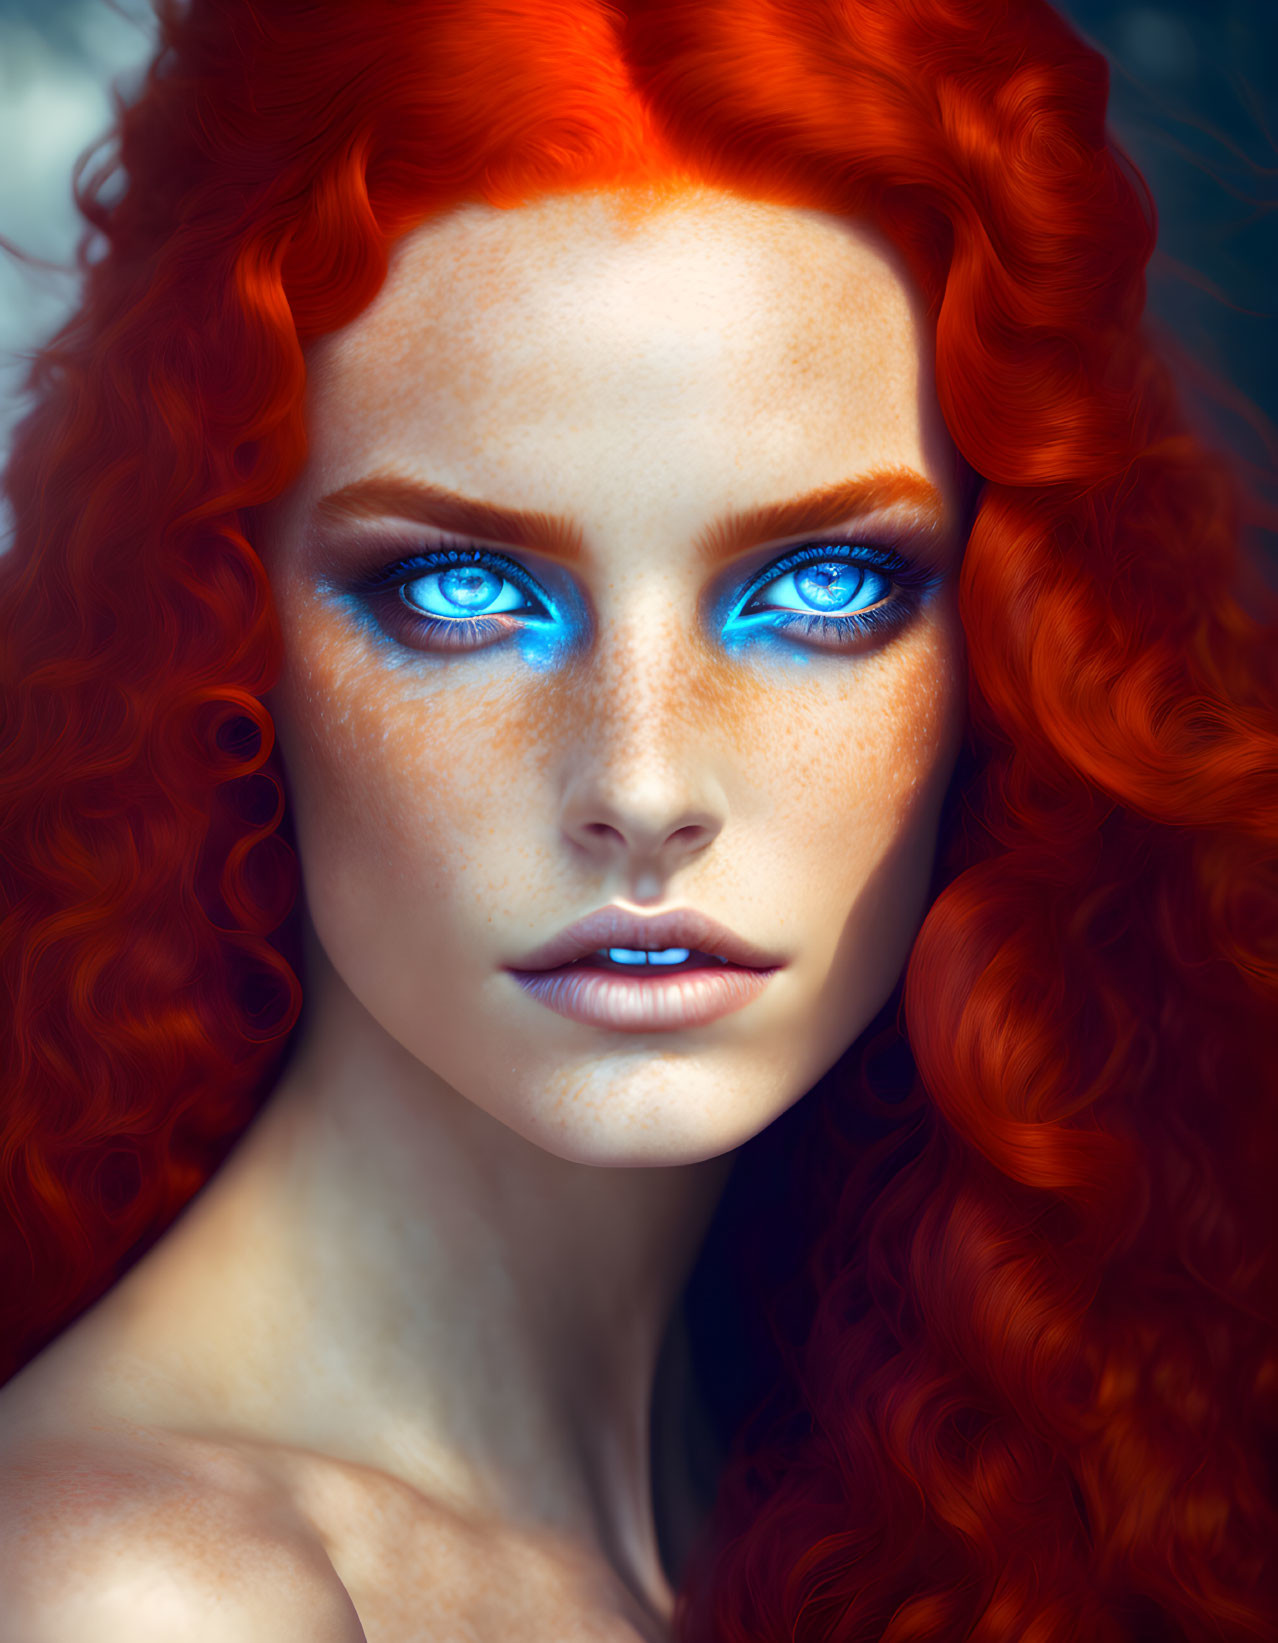 Portrait of Woman: Red Hair, Blue Eyes, Detailed Skin Textures